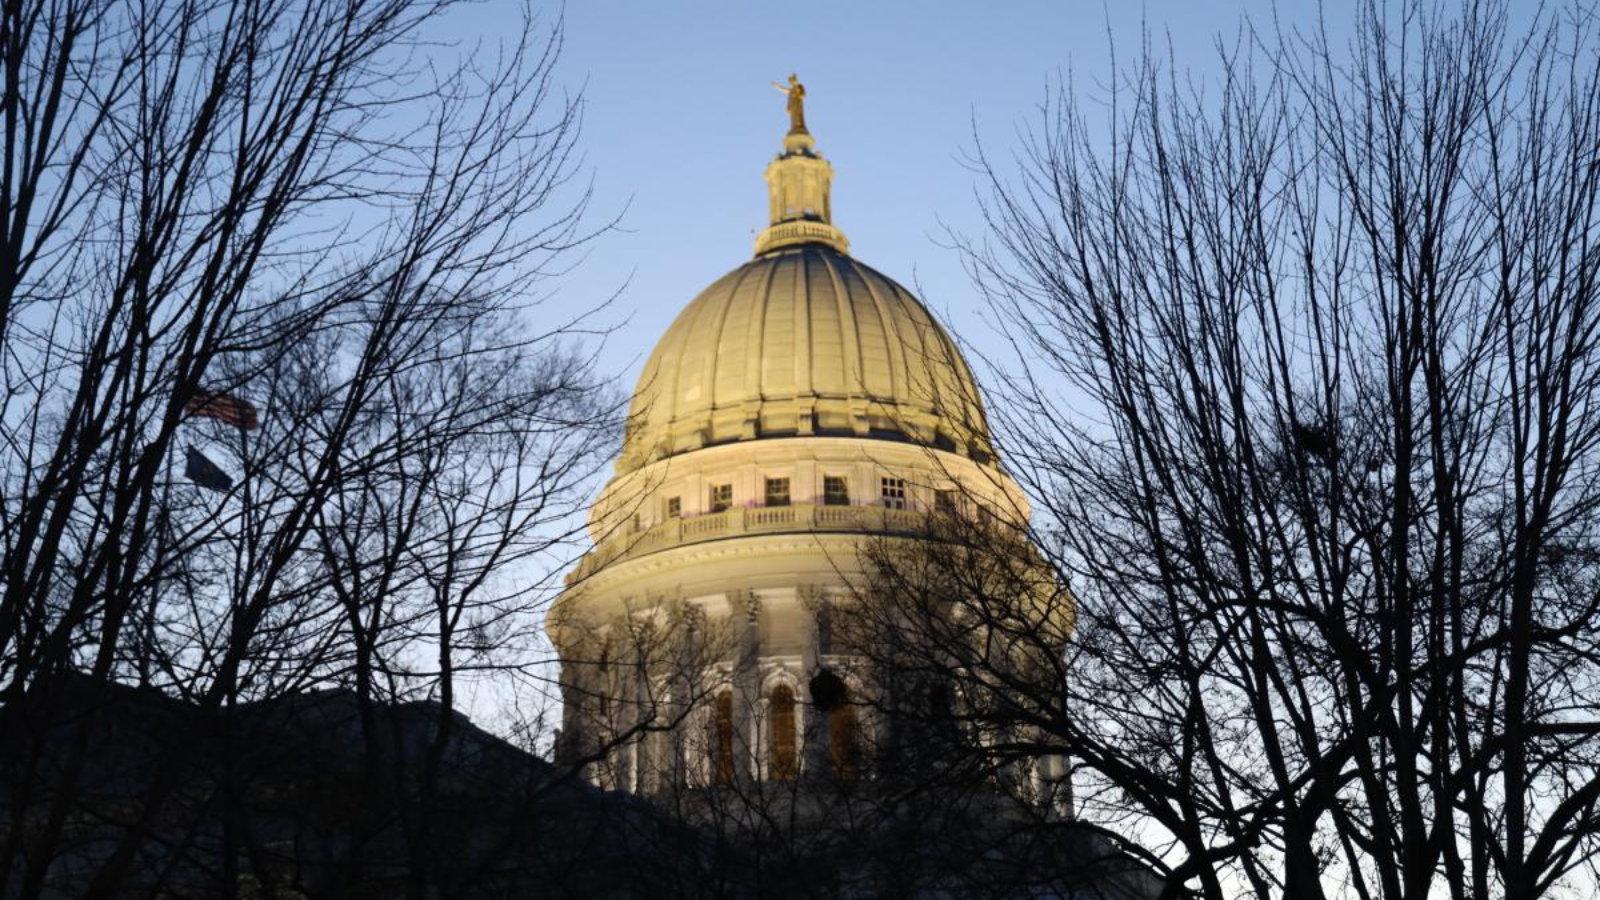 Proposal to centralize campaign finance reports for local elected officials stalls in Assembly